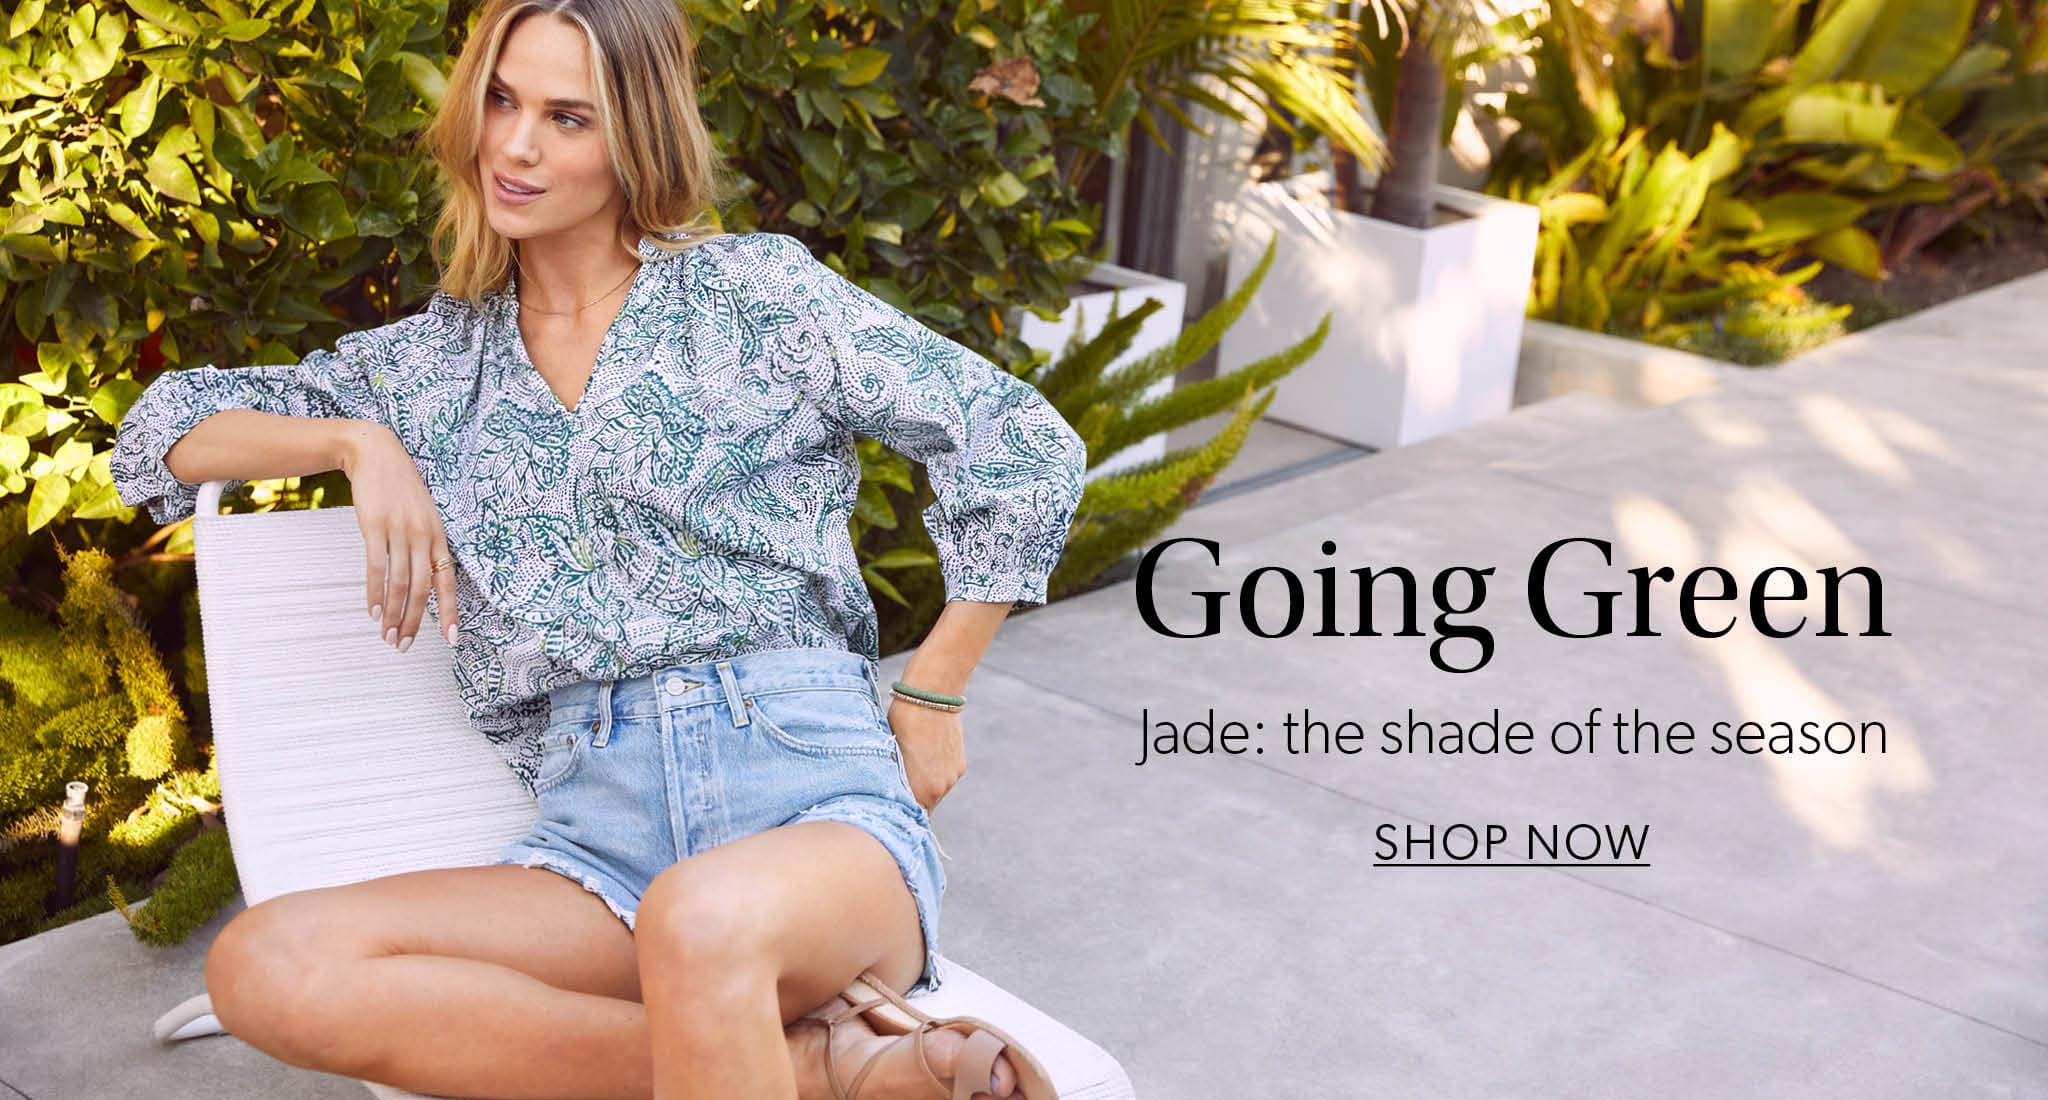 Going Green - Jade: the shade of the season. Shop Now